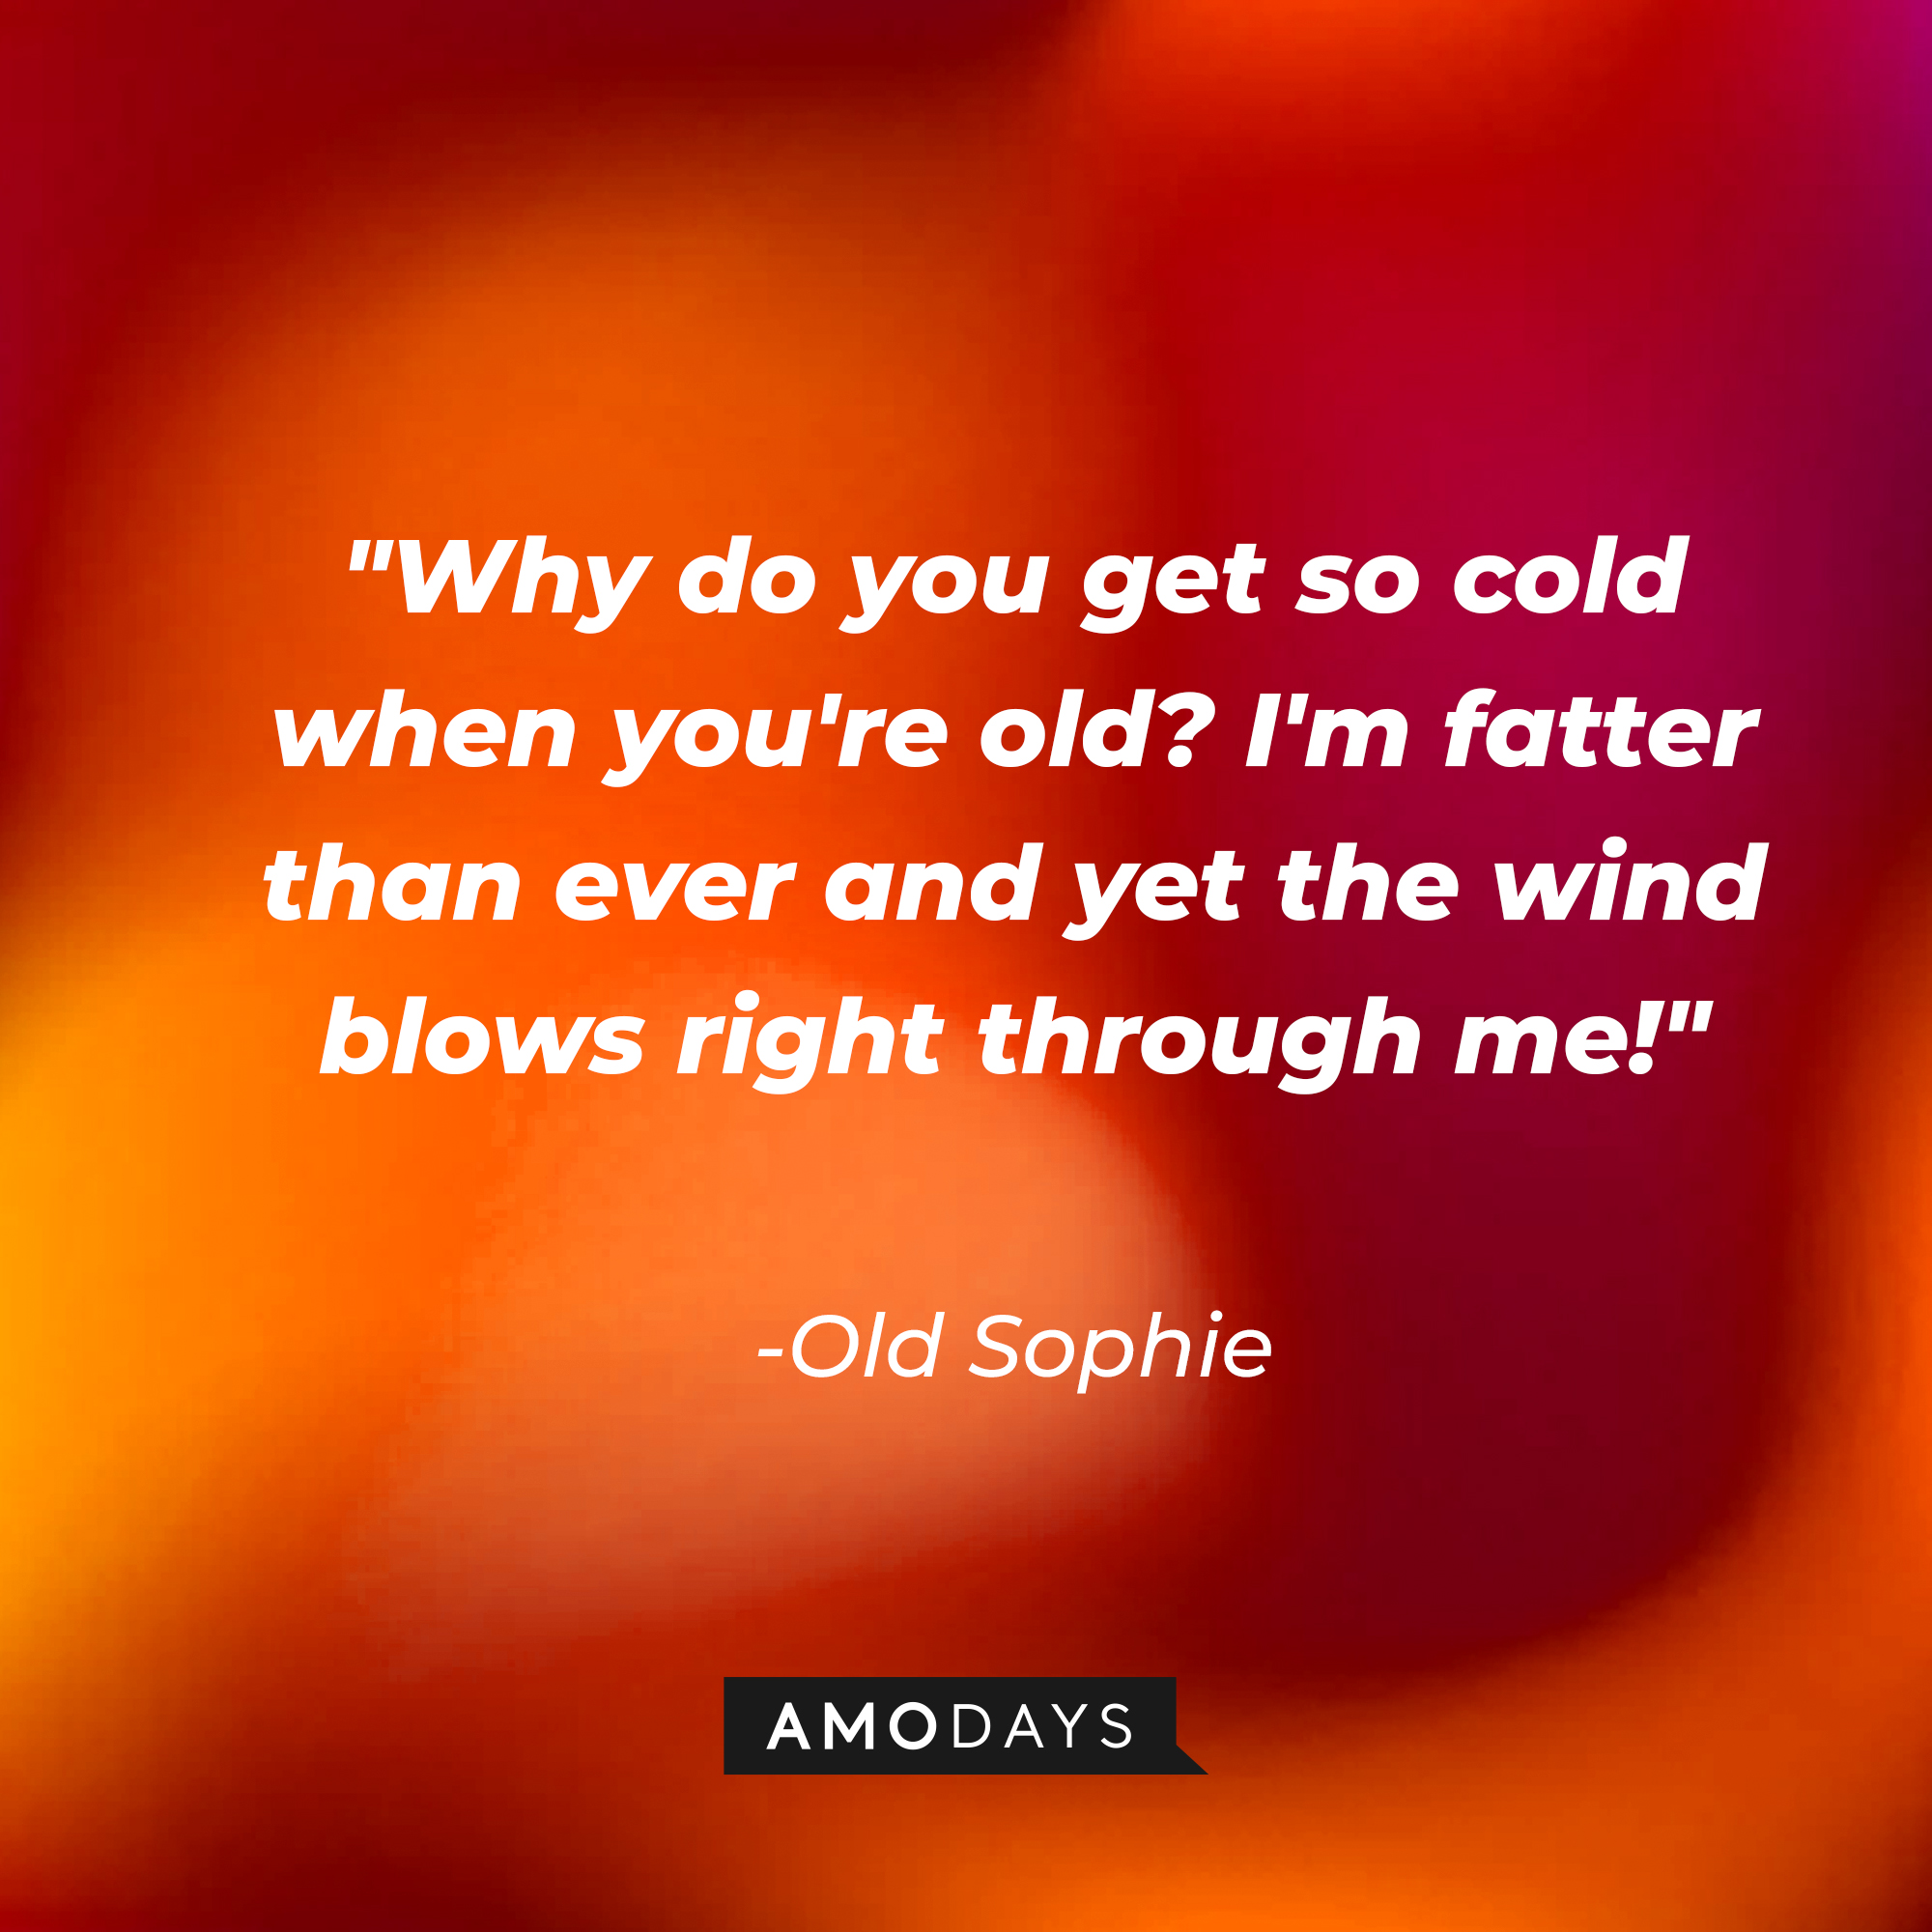 Old Sophie's quote: "Why do you get so cold when you're old? I'm fatter than ever and yet the wind blows right through me!" | Source: Amodays